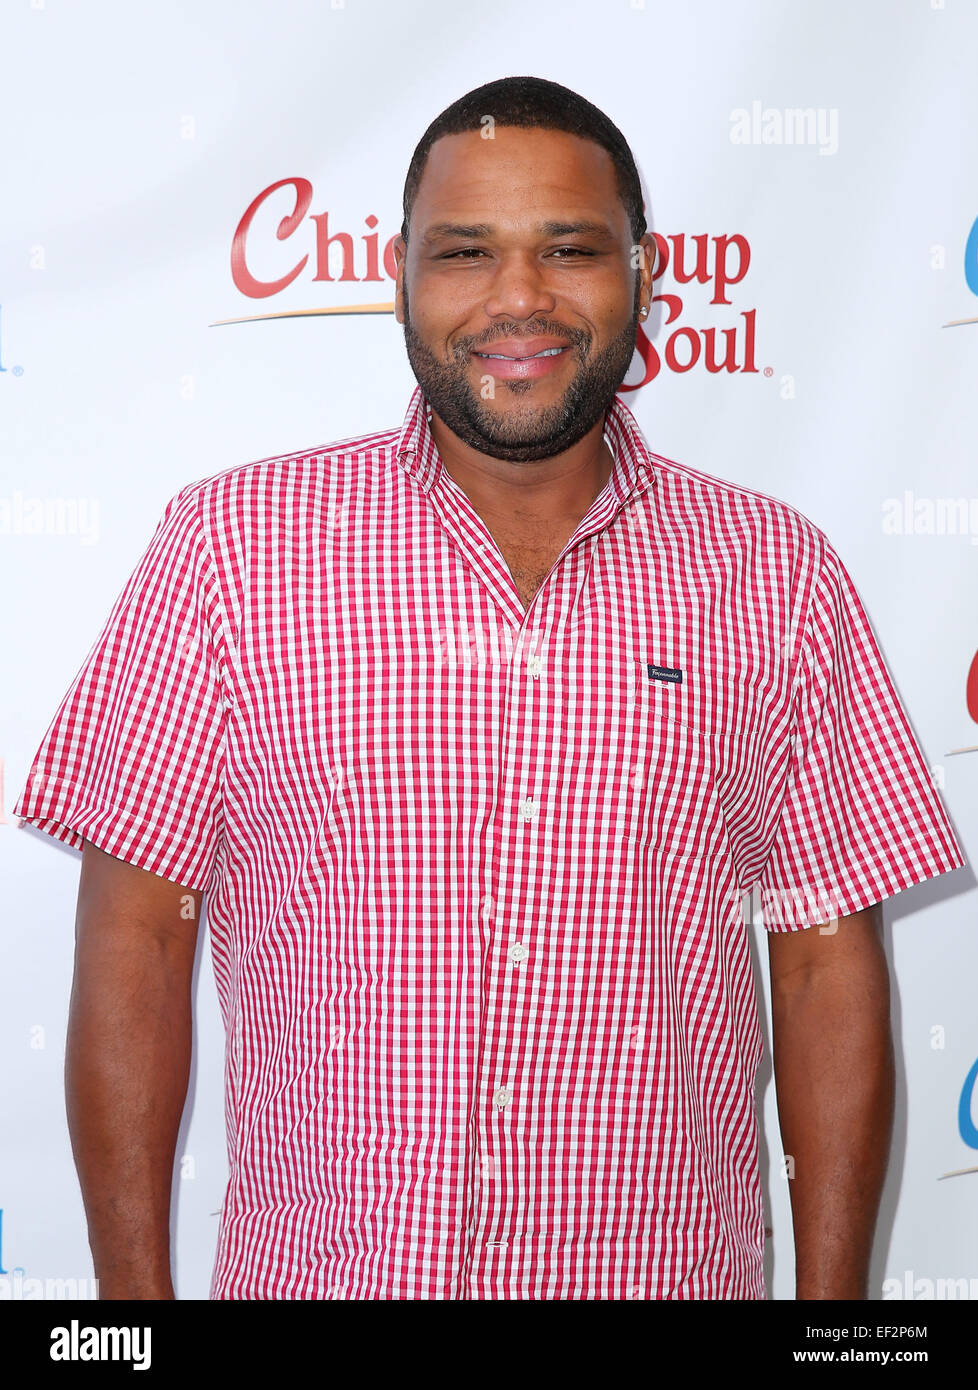 Actor Anthony Anderson Joins Chicken Soup For The Soul to Celebrate its Latest Book Titles, Pet Food Line and More  Featuring: Anthony Anderson Where: Las Vegas, Nevada, United States When: 24 Jul 2014 Stock Photo